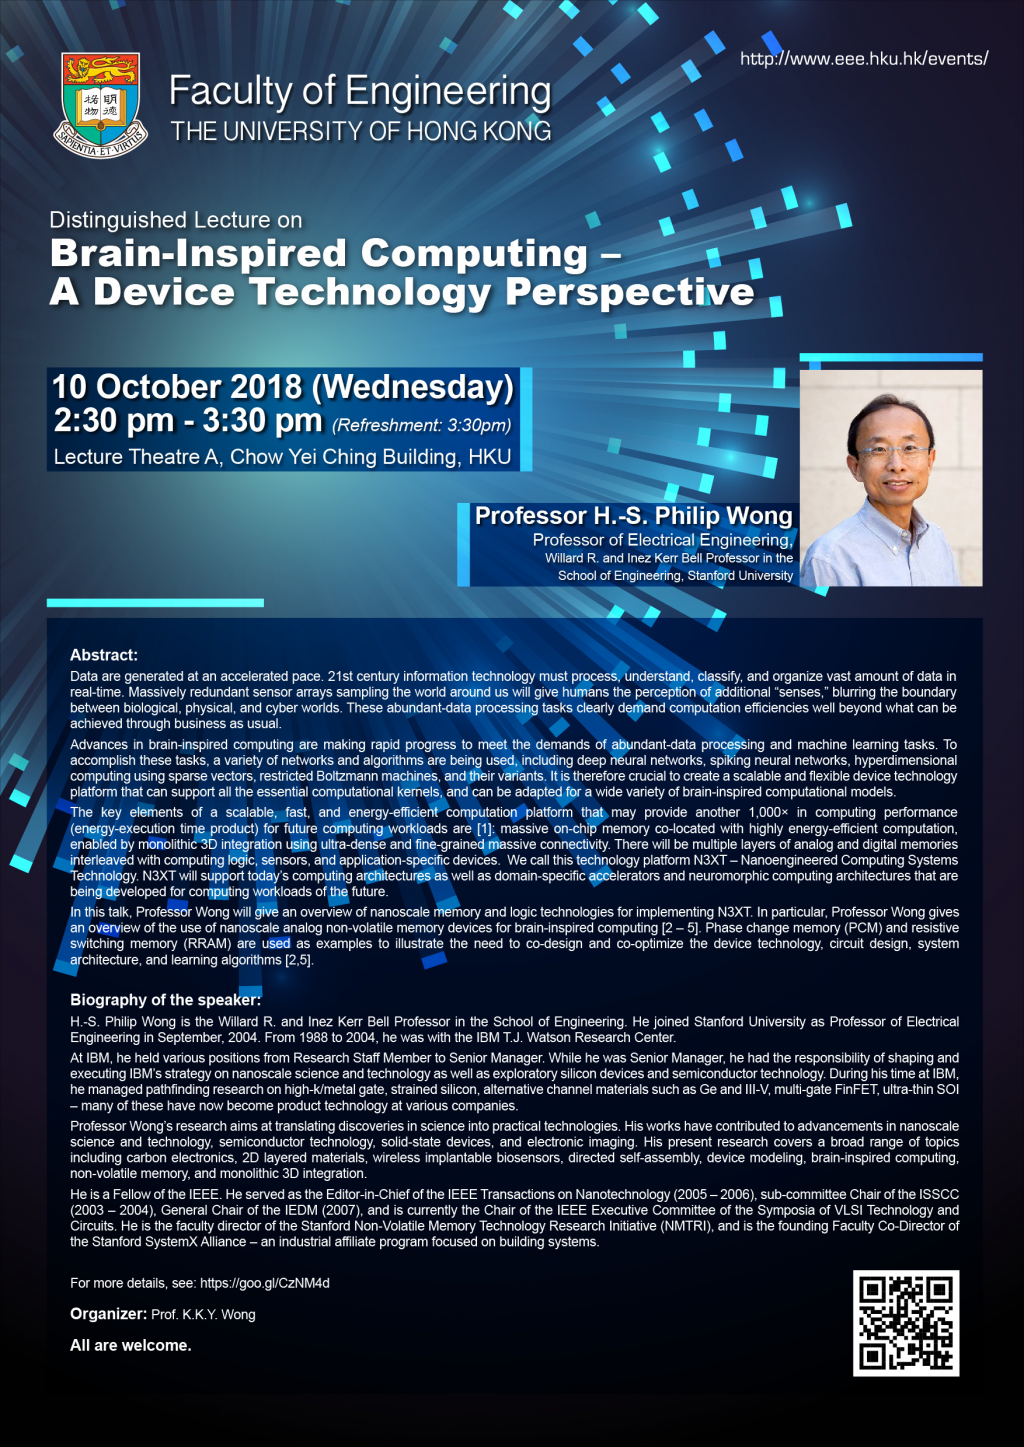 Distinguished Lecture on Brain-Inspired Computing: A Device Technology Perspective